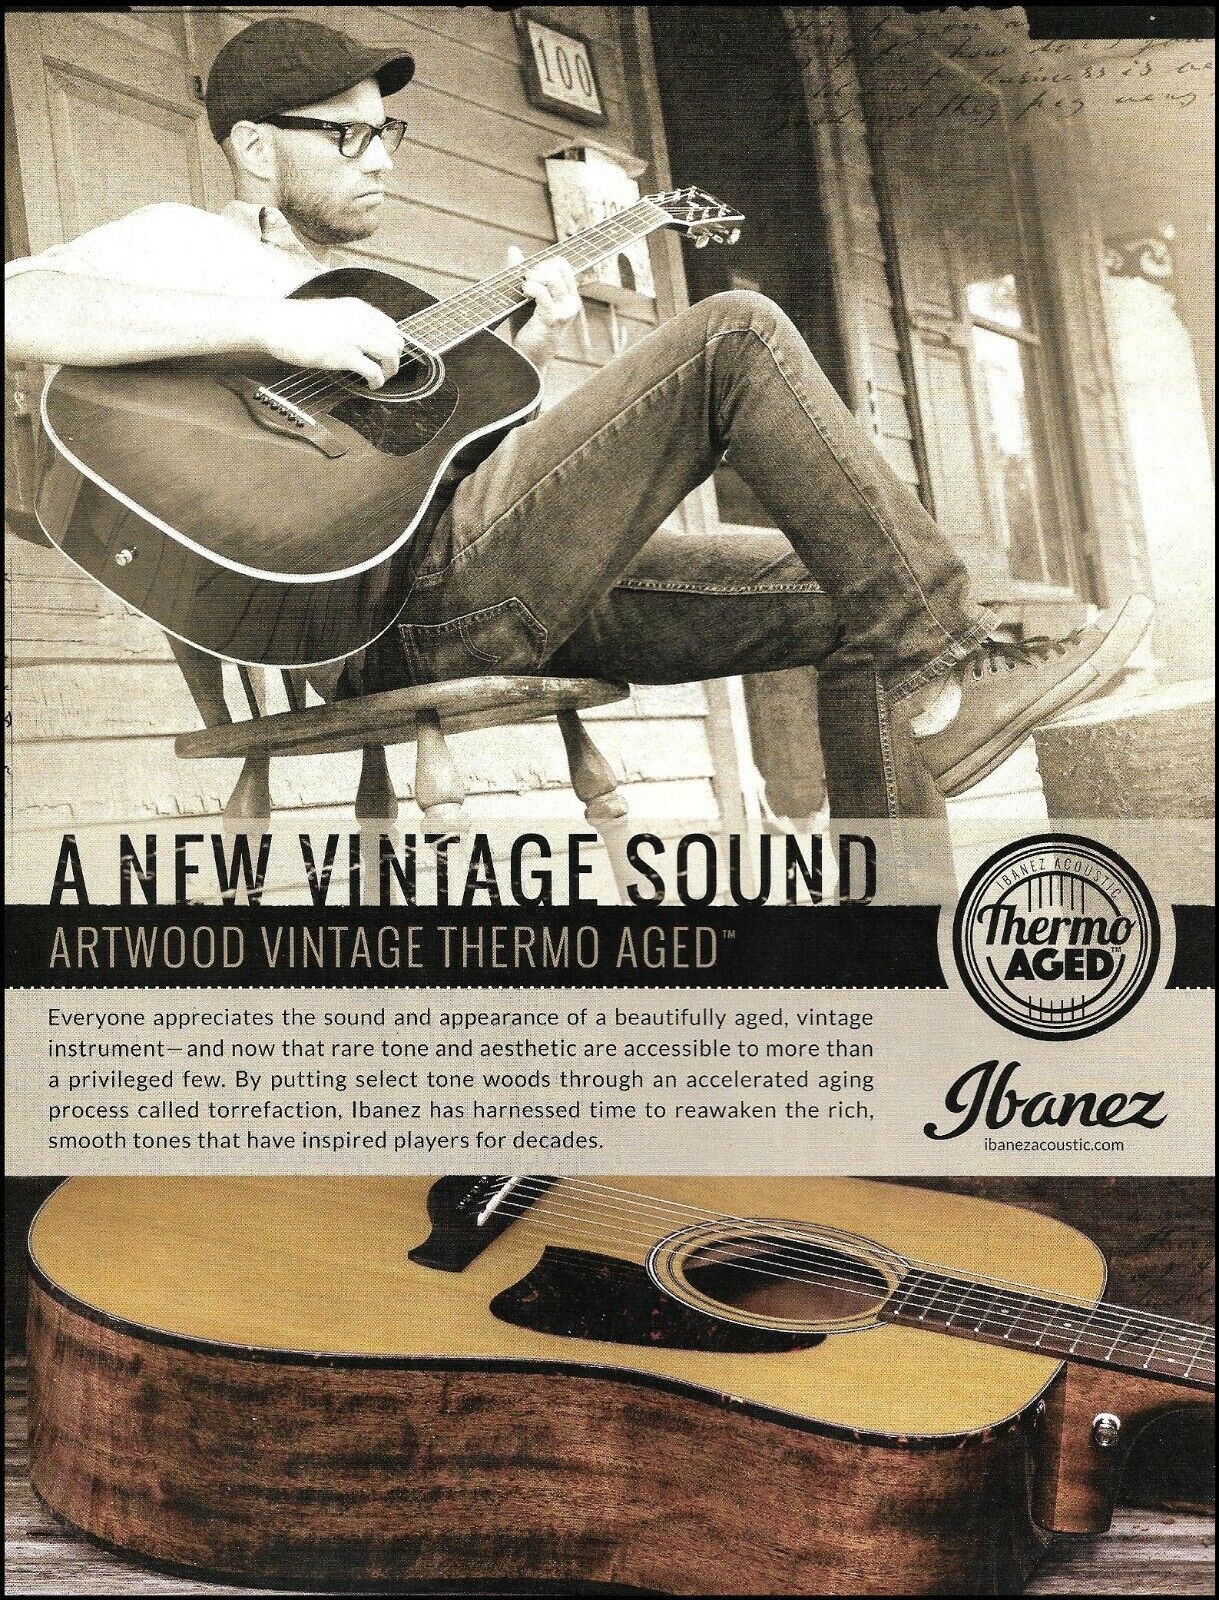 Ibanez Artwood Vintage Thermo Aged Series Acoustic Guitar ad print advertisement